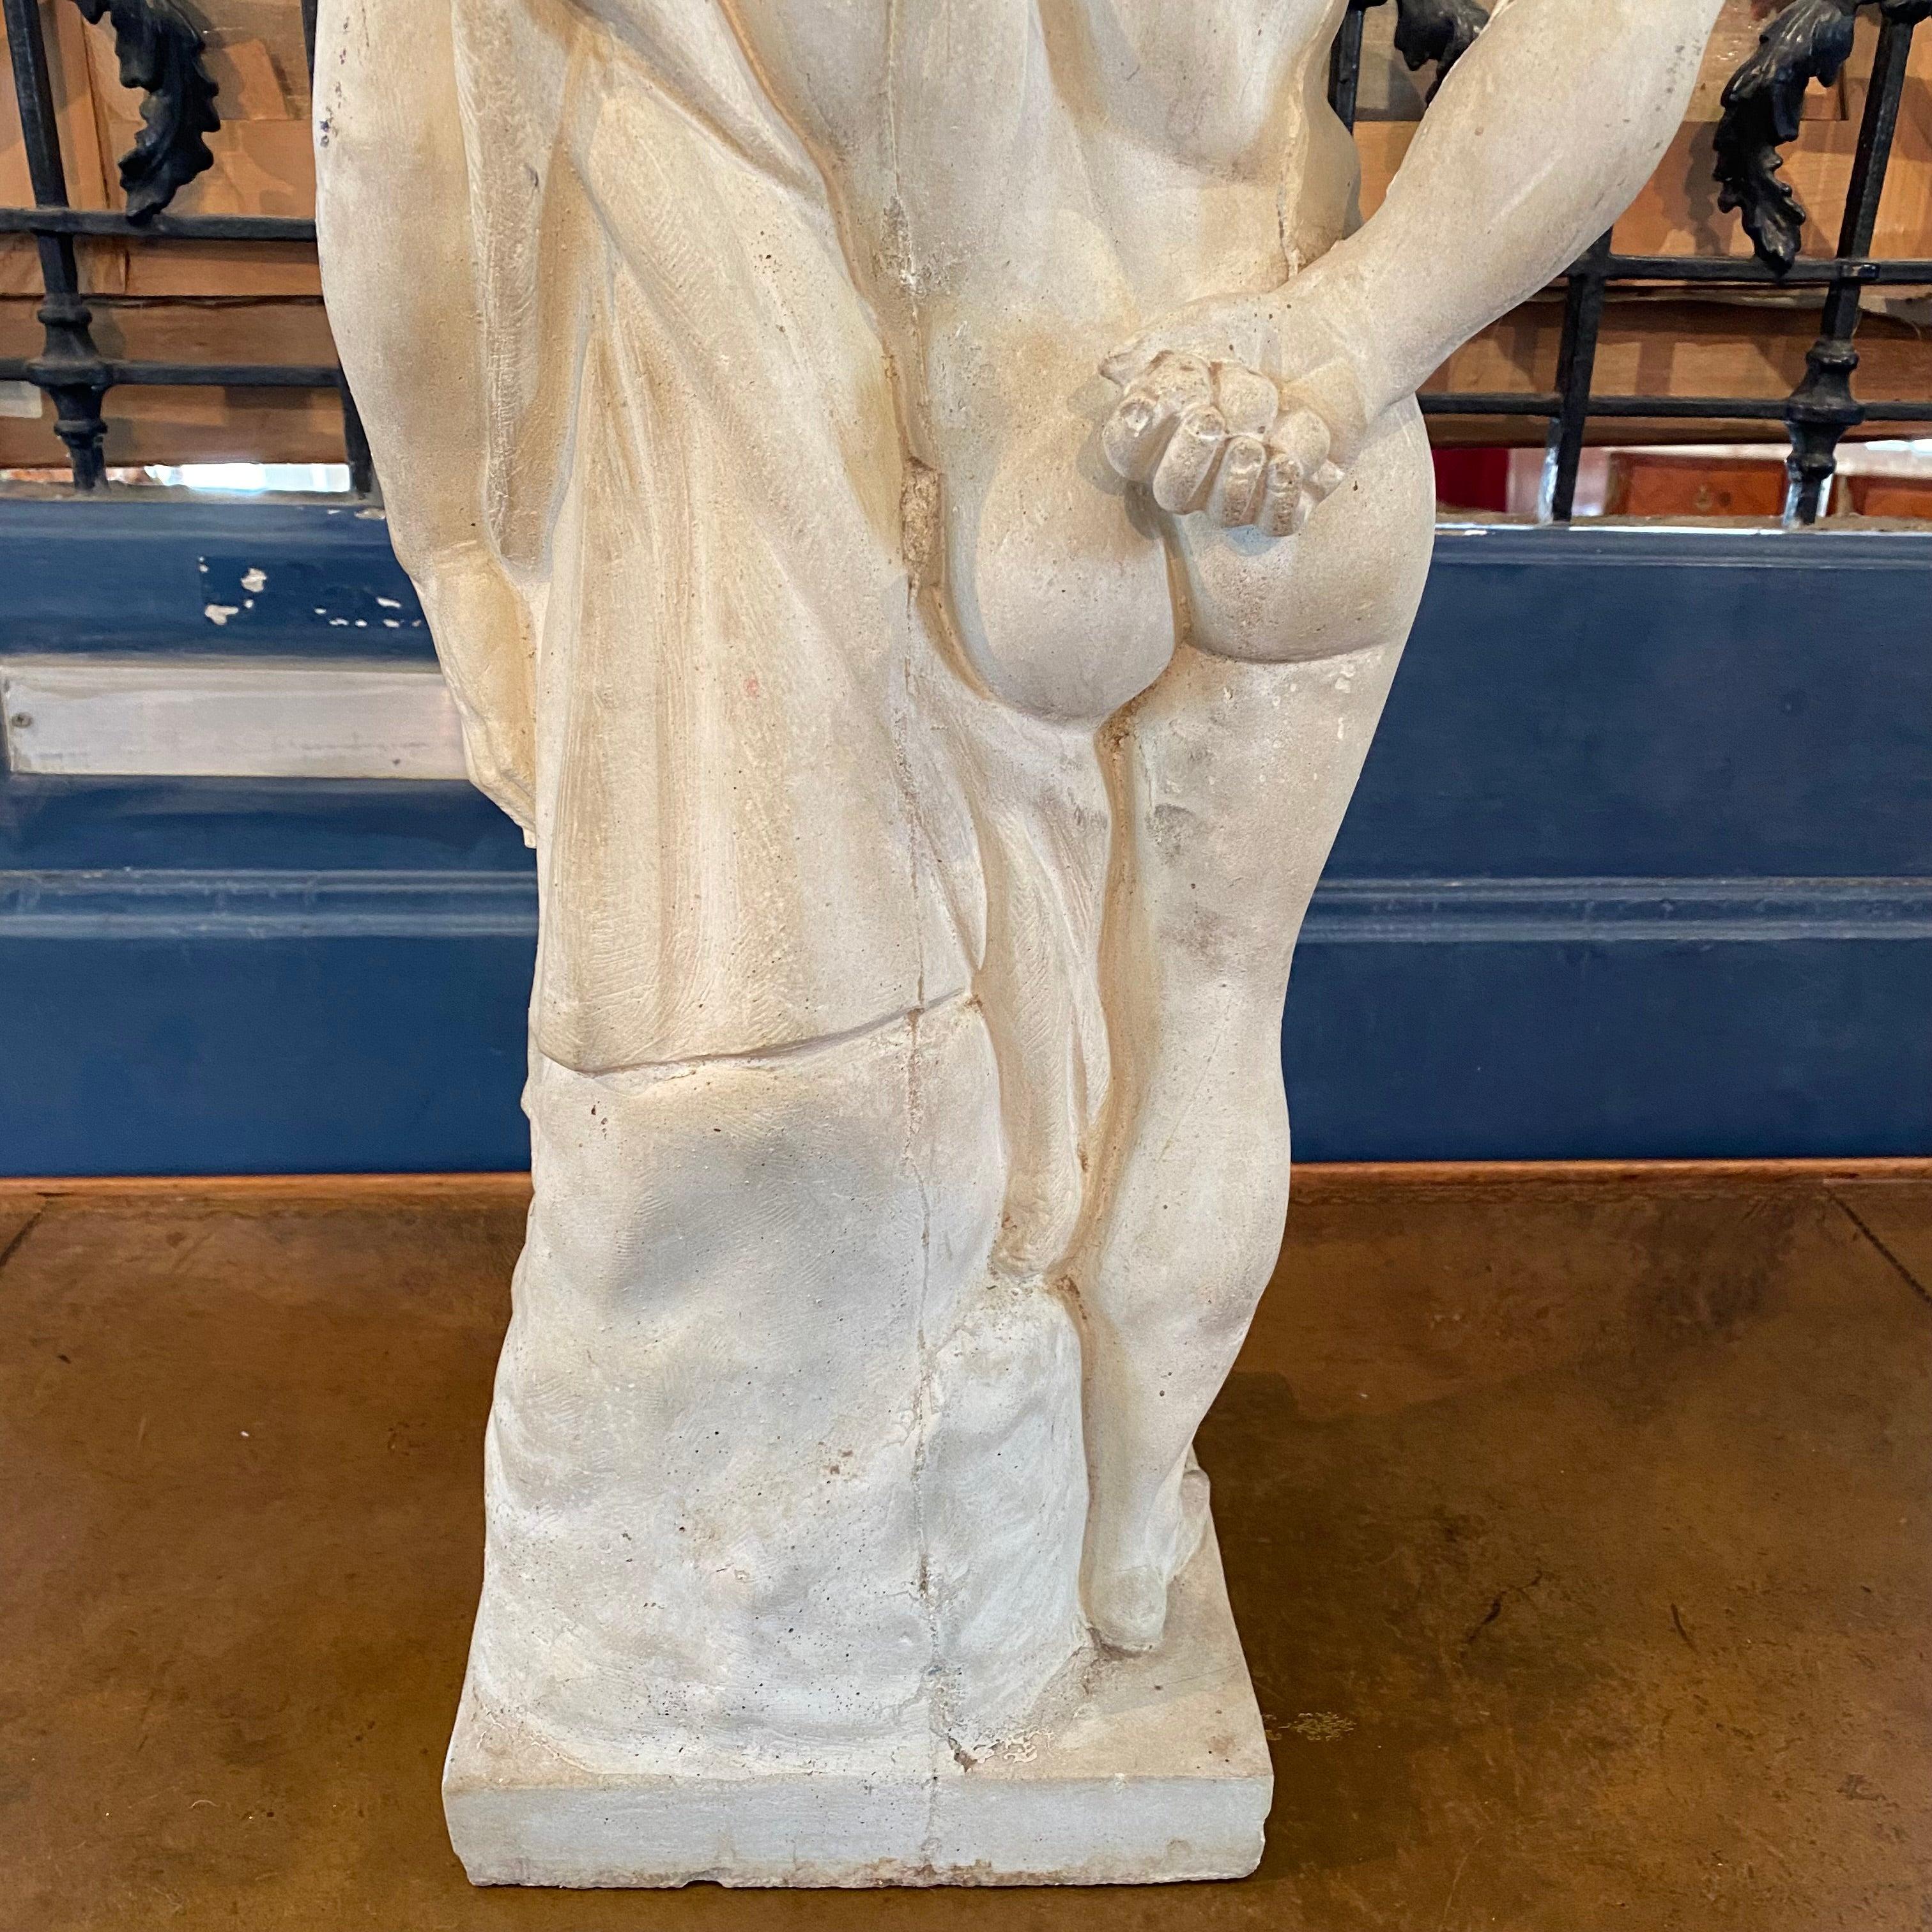 Plaster Sensual Realistic French Sculpture of Male Nude Mythological Figure Hercules For Sale